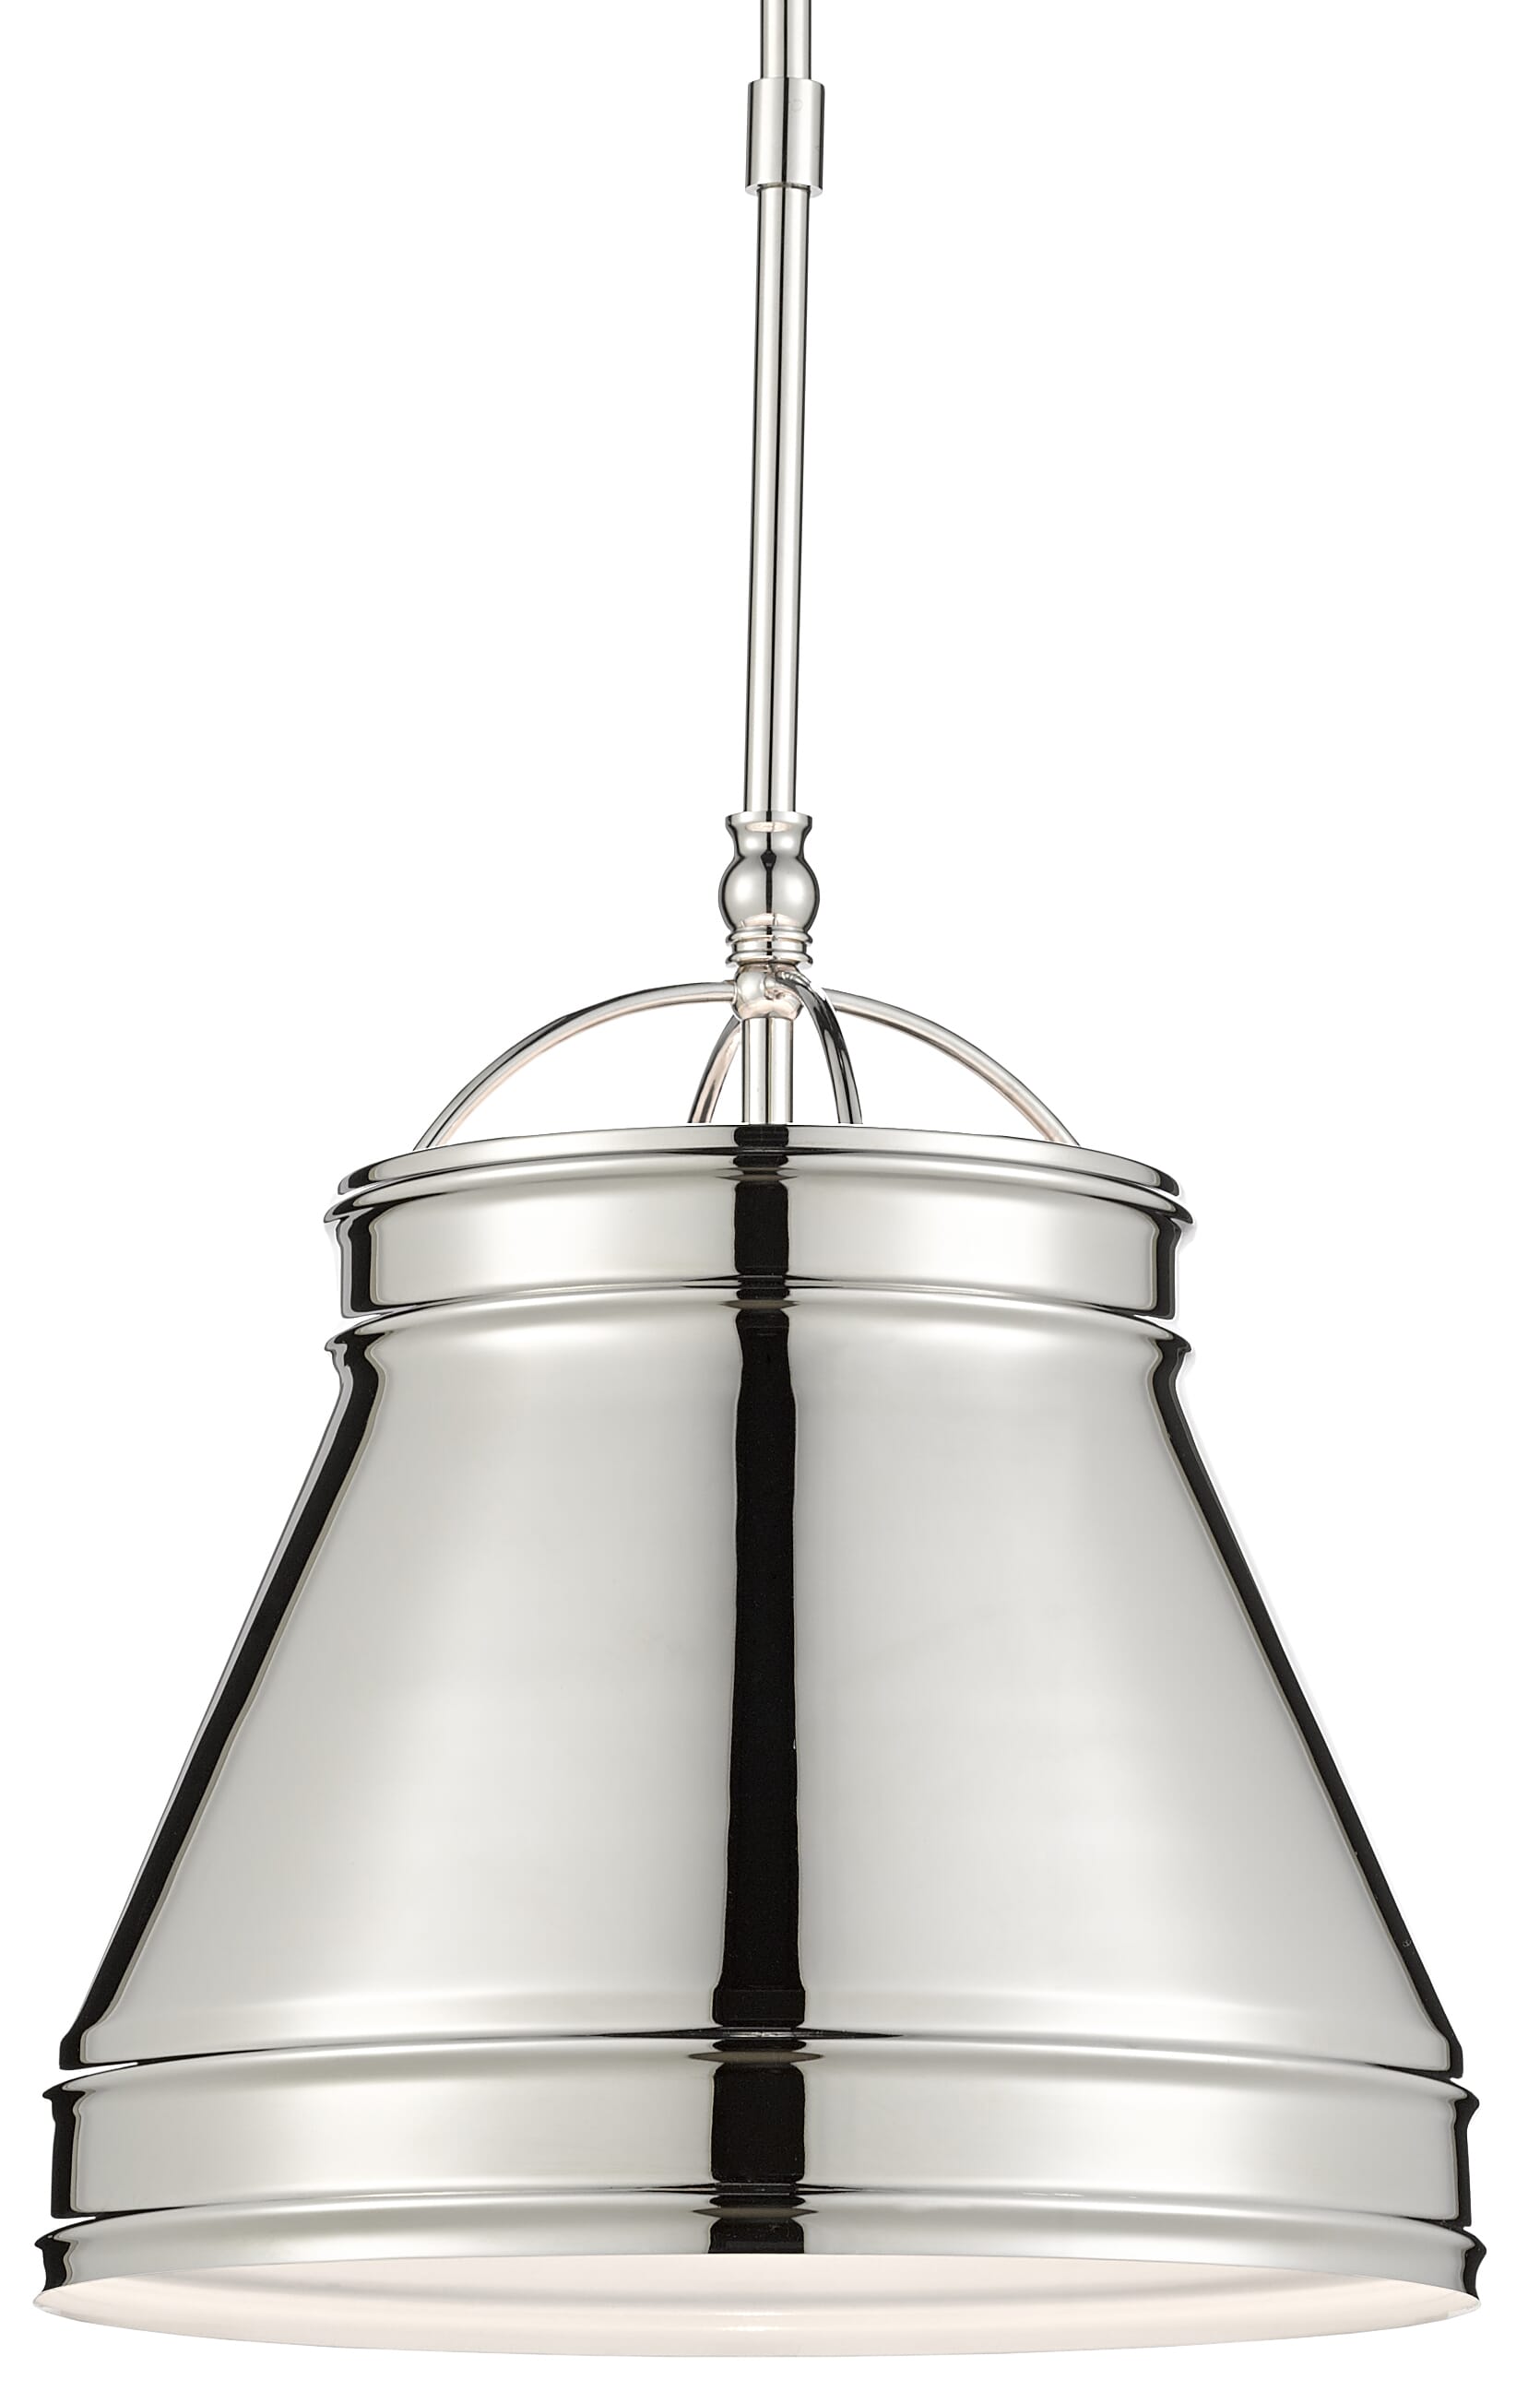 Currey & Company Lumley Pendant Light in Polished Nickel